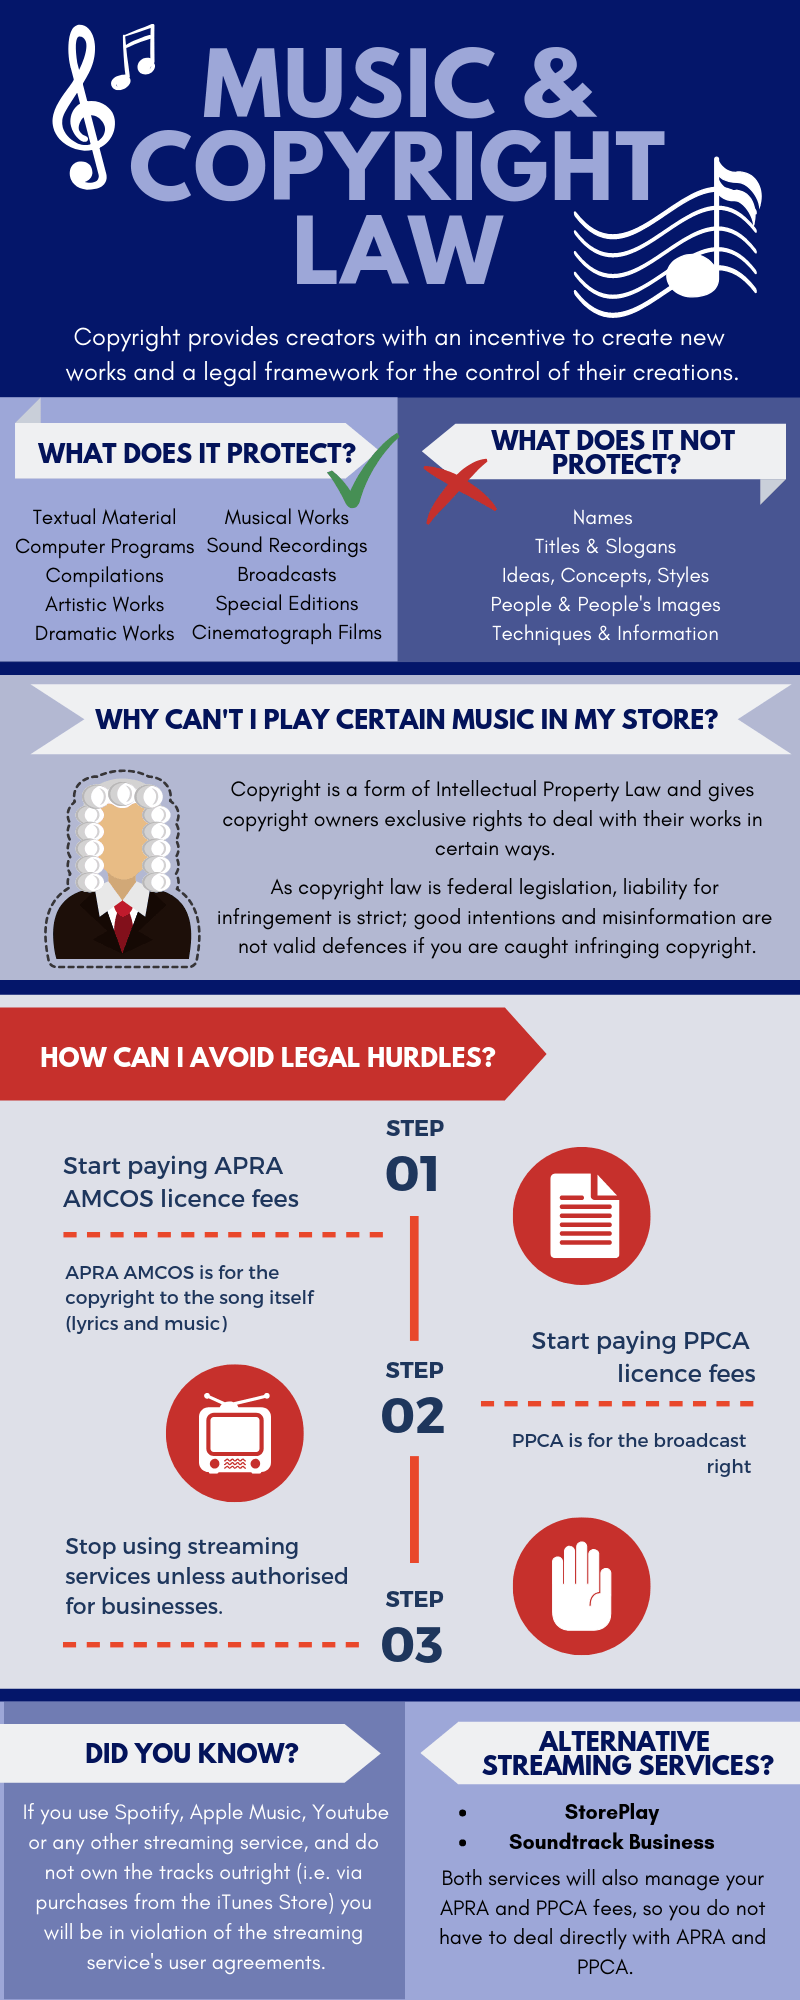 Music and Copyright law - protected and not protected, why you can't play certain music in my store, APRA, AMCOS and PPCA